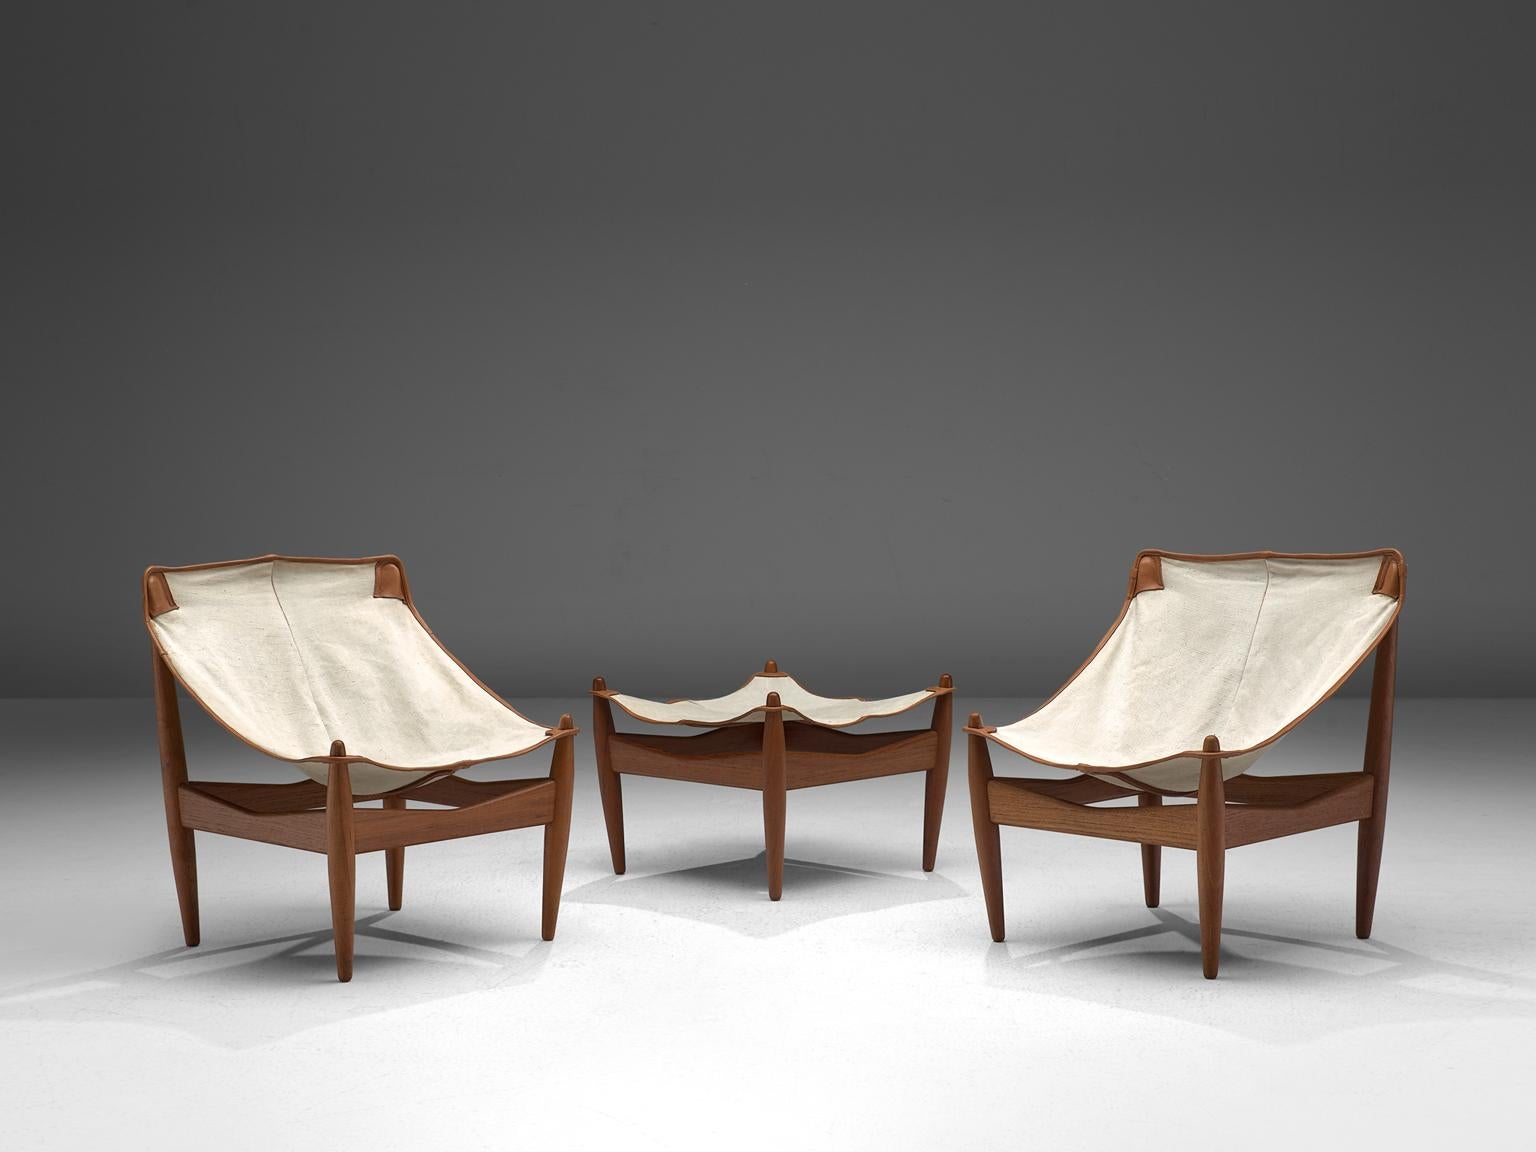 Illum Wikkelsø C.F. Christiansen, pair of easy chairs and ottoman model 272, teak, canvas and leather, Denmark, 1960s.

Very rare easy chairs and ottoman model 272 in teak and canvas designed by Illum Wikkelsø. The solid teak legs are tapered and